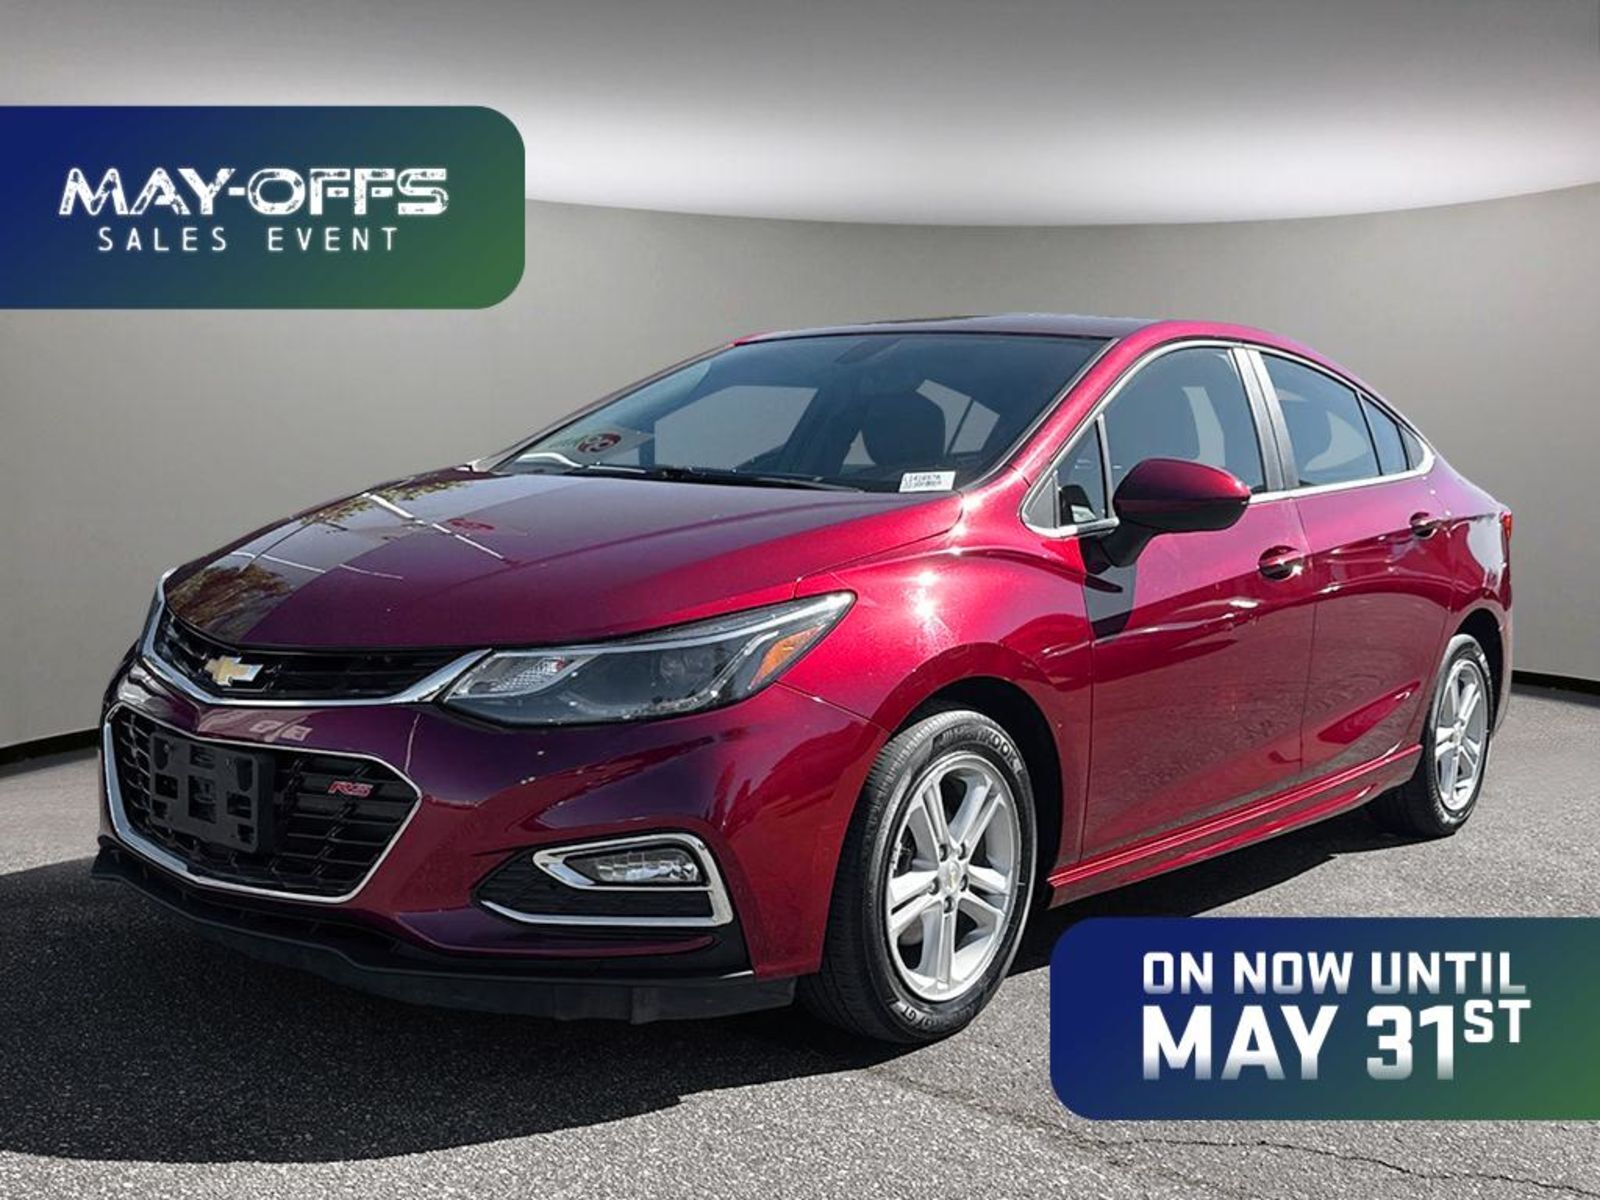 2016 Chevrolet Cruze LT - Leather / Rear View Cam / Apple CarPlay / And